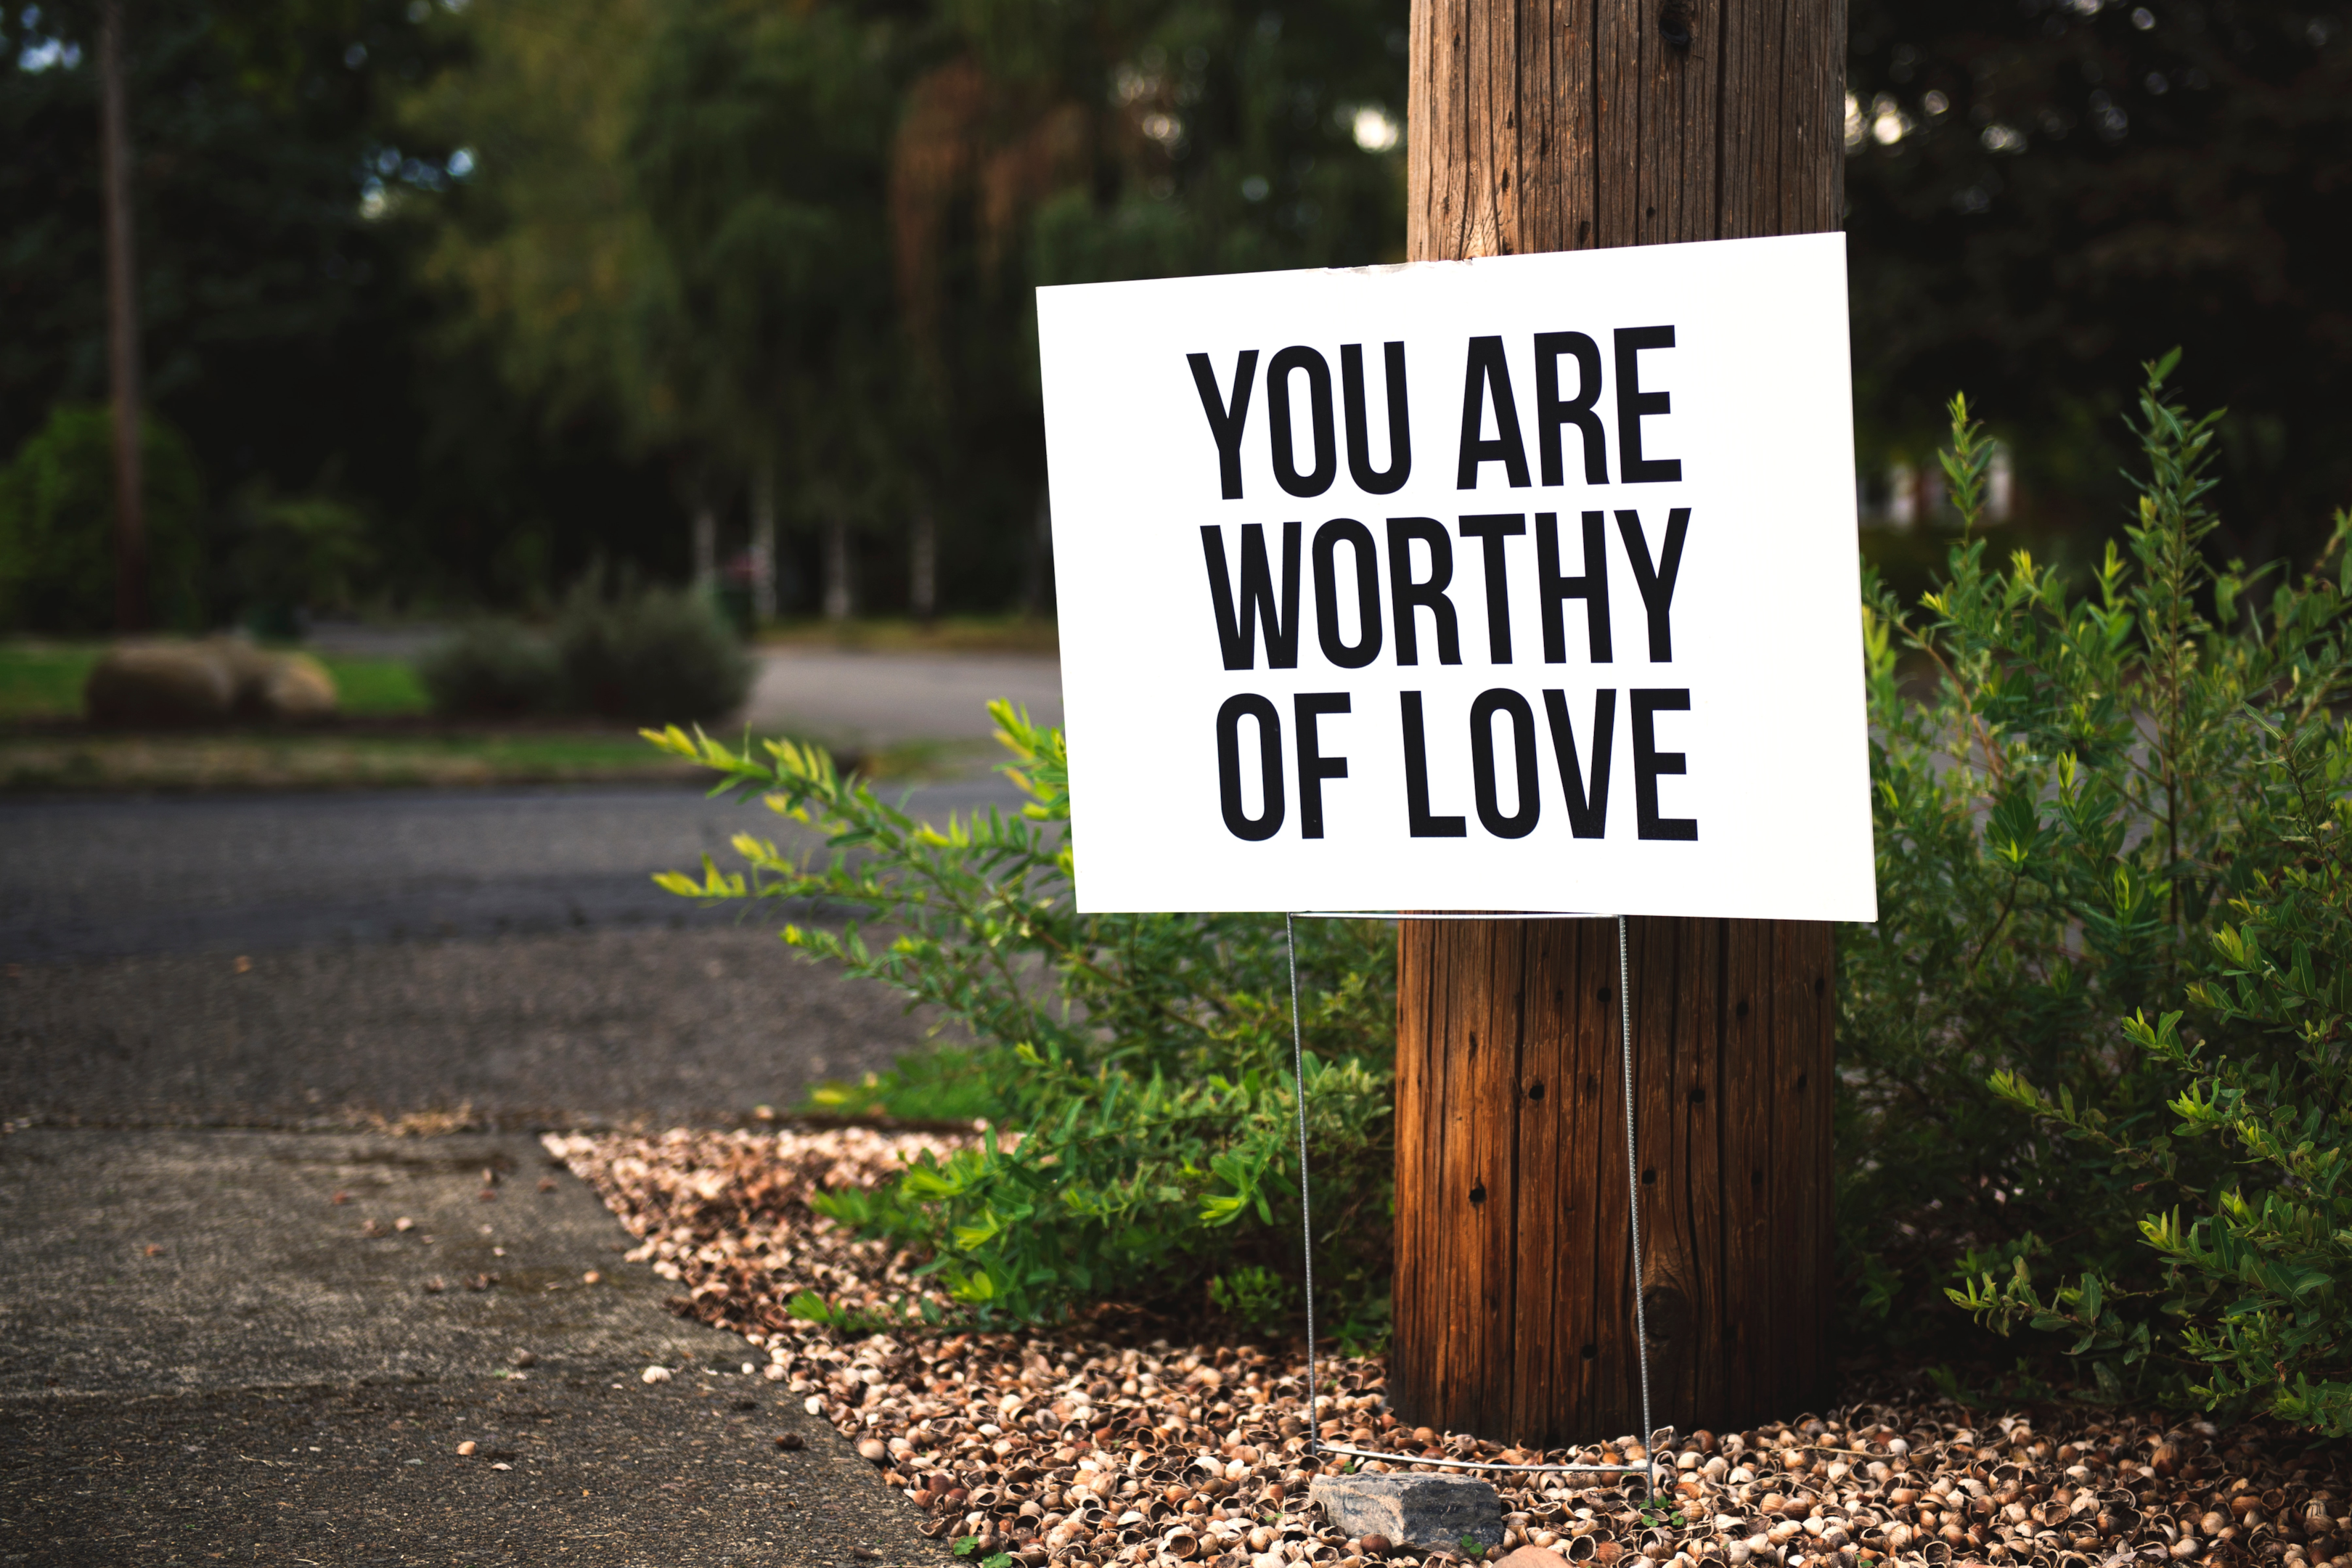 A sign in front of tree that says " You are worthy of LOVE"